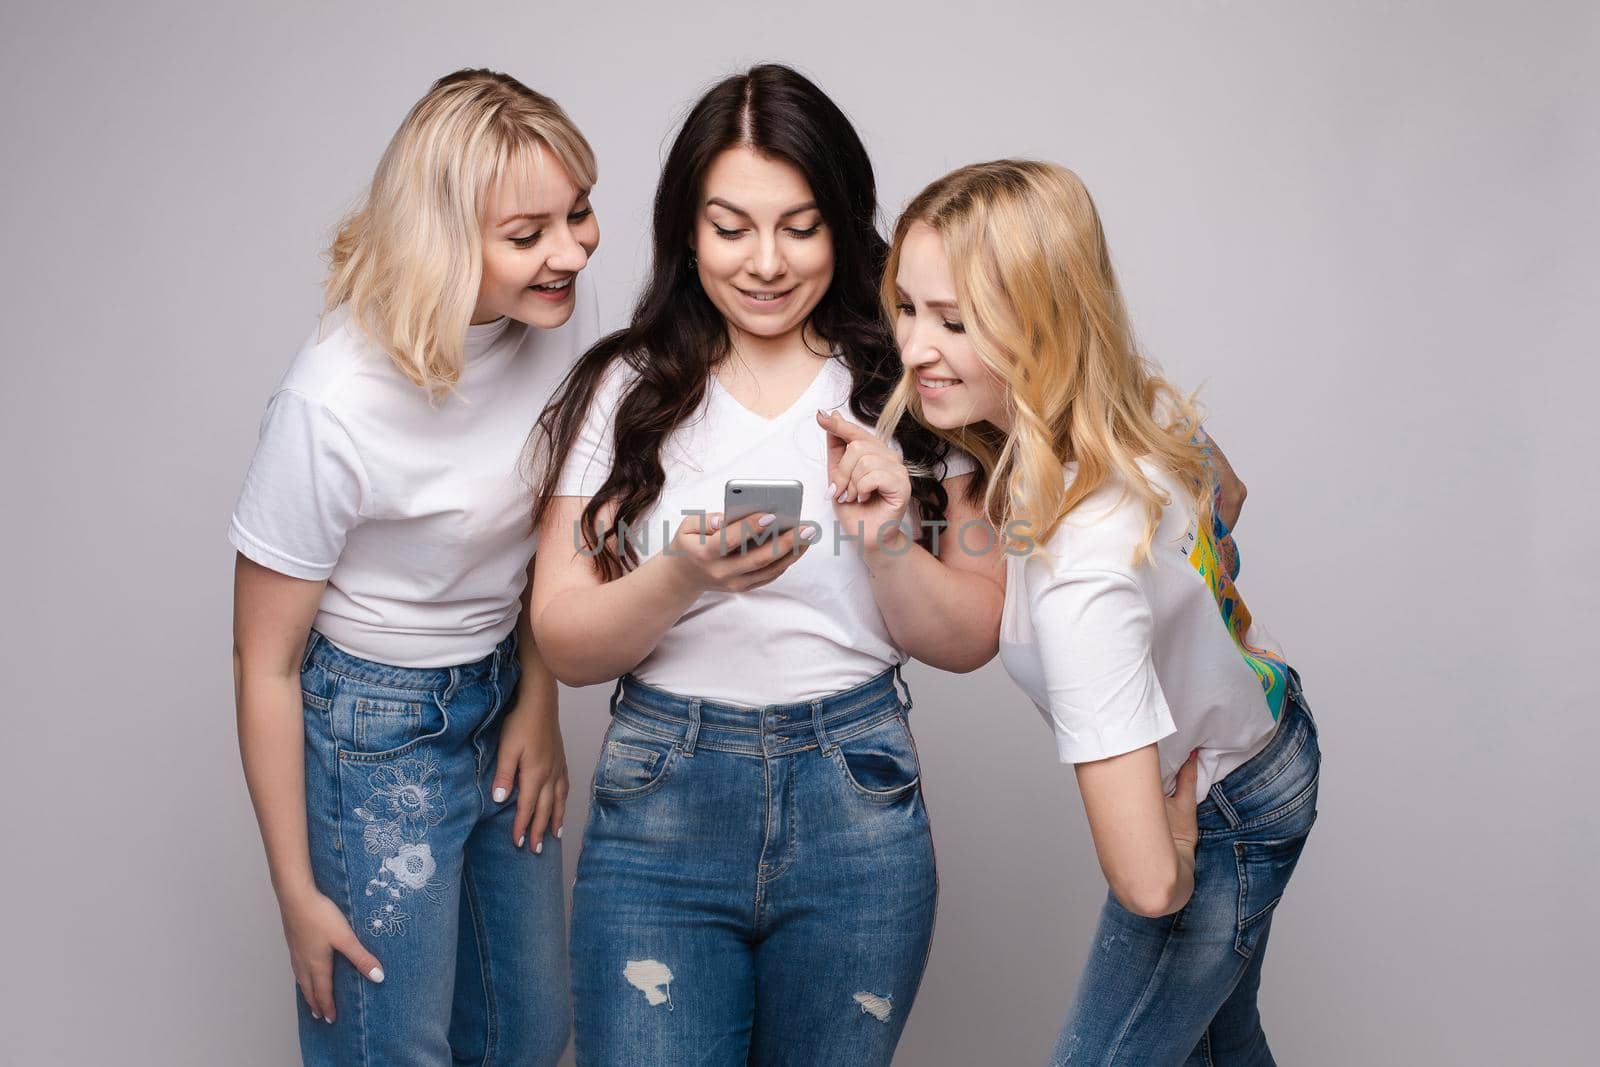 Studio portrait of two girls loking at the mobile phone while blonde girls using it. Gossip or rumour concept. Isolate.